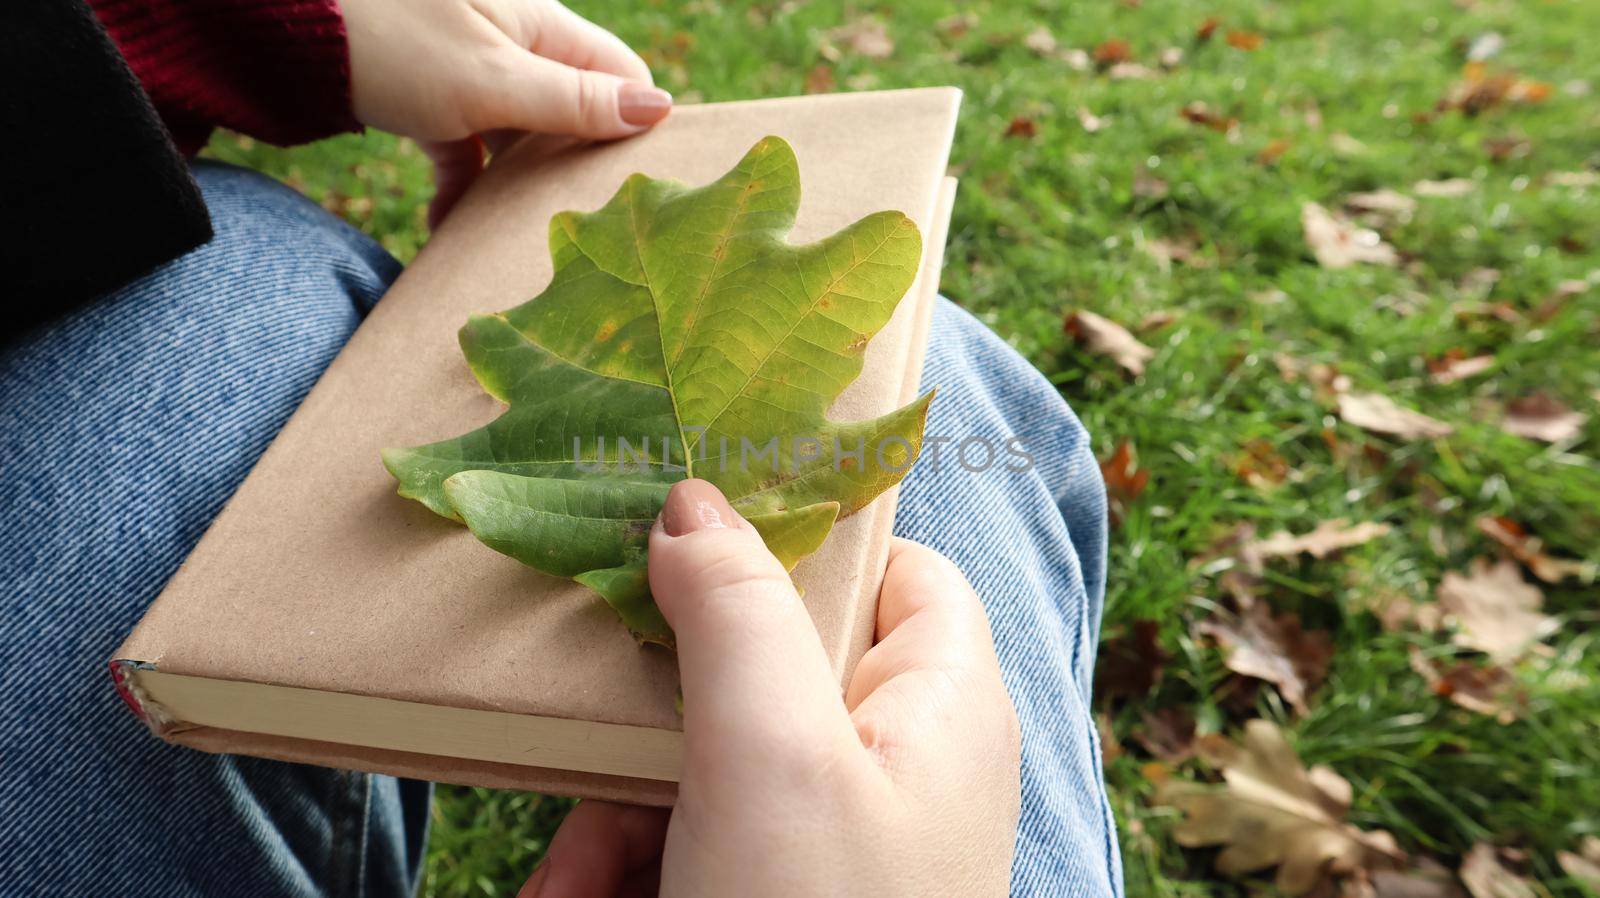 A woman holds a closed book lying in her lap with a fallen oak leaf close-up in a park on a sunny warm autumn day. The concept of relaxation, reading and relaxation alone